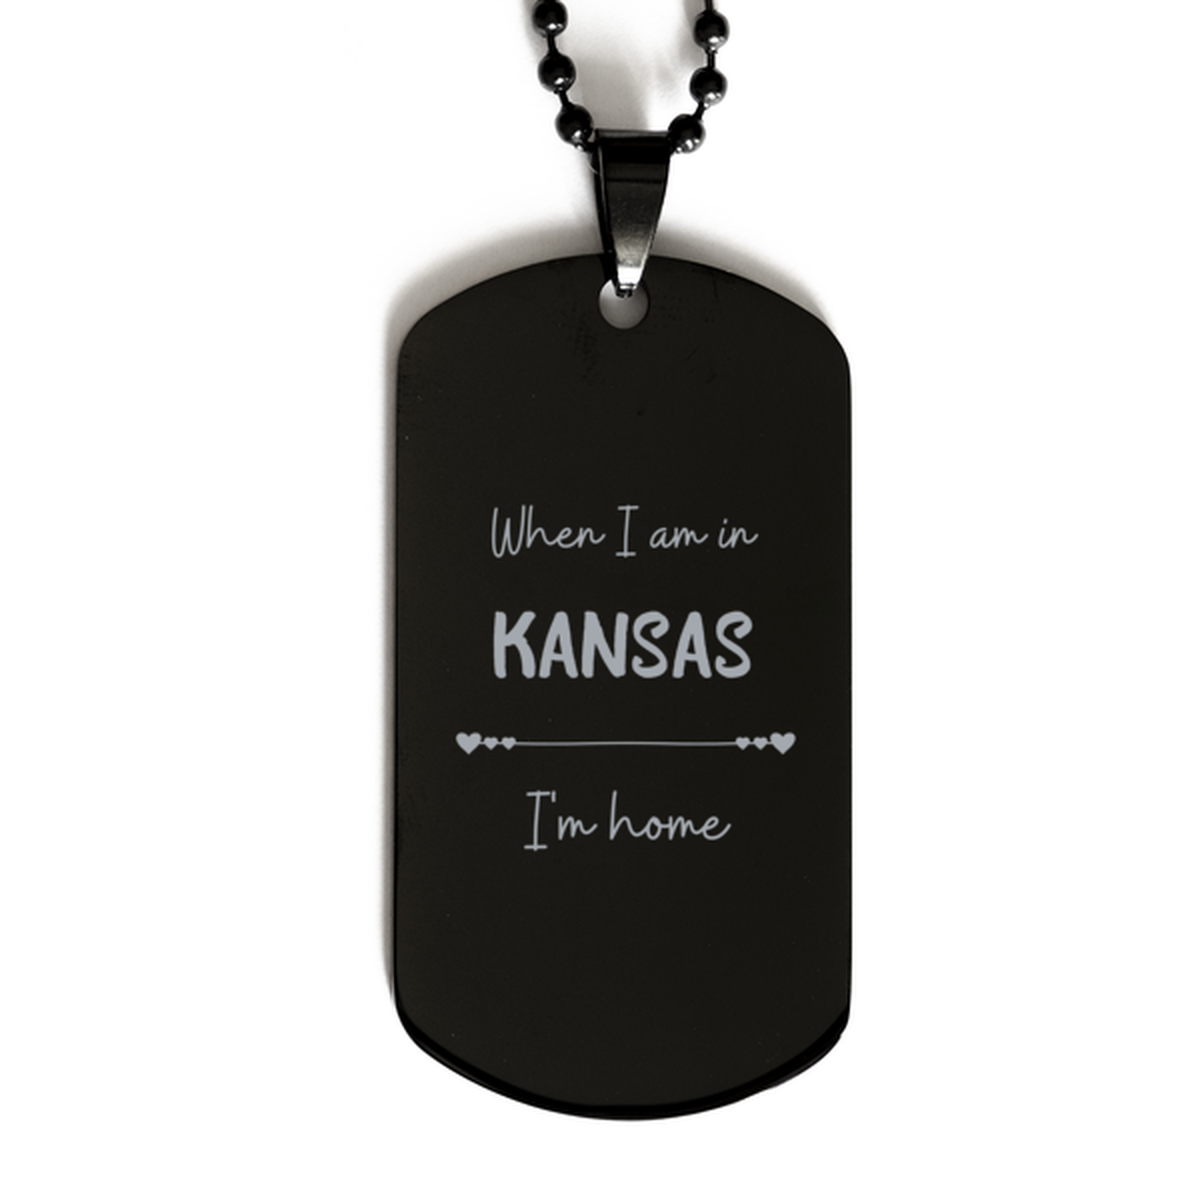 When I am in Kansas I'm home Black Dog Tag, Cheap Gifts For Kansas, State Kansas Birthday Gifts for Friends Coworker